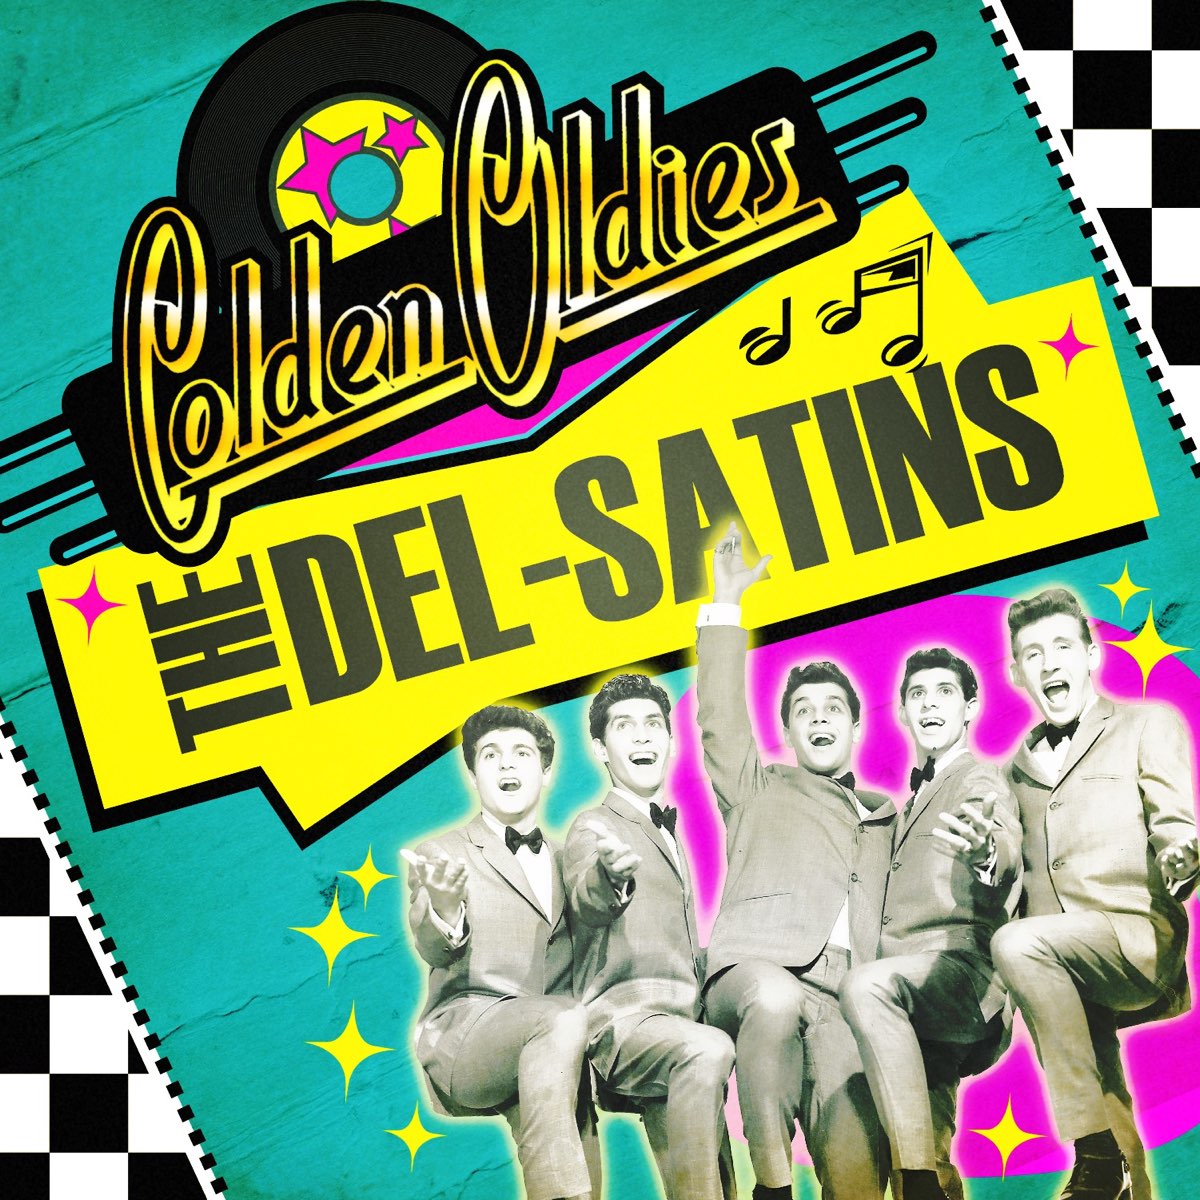 Golden Oldies by The Del-Satins on Apple Music